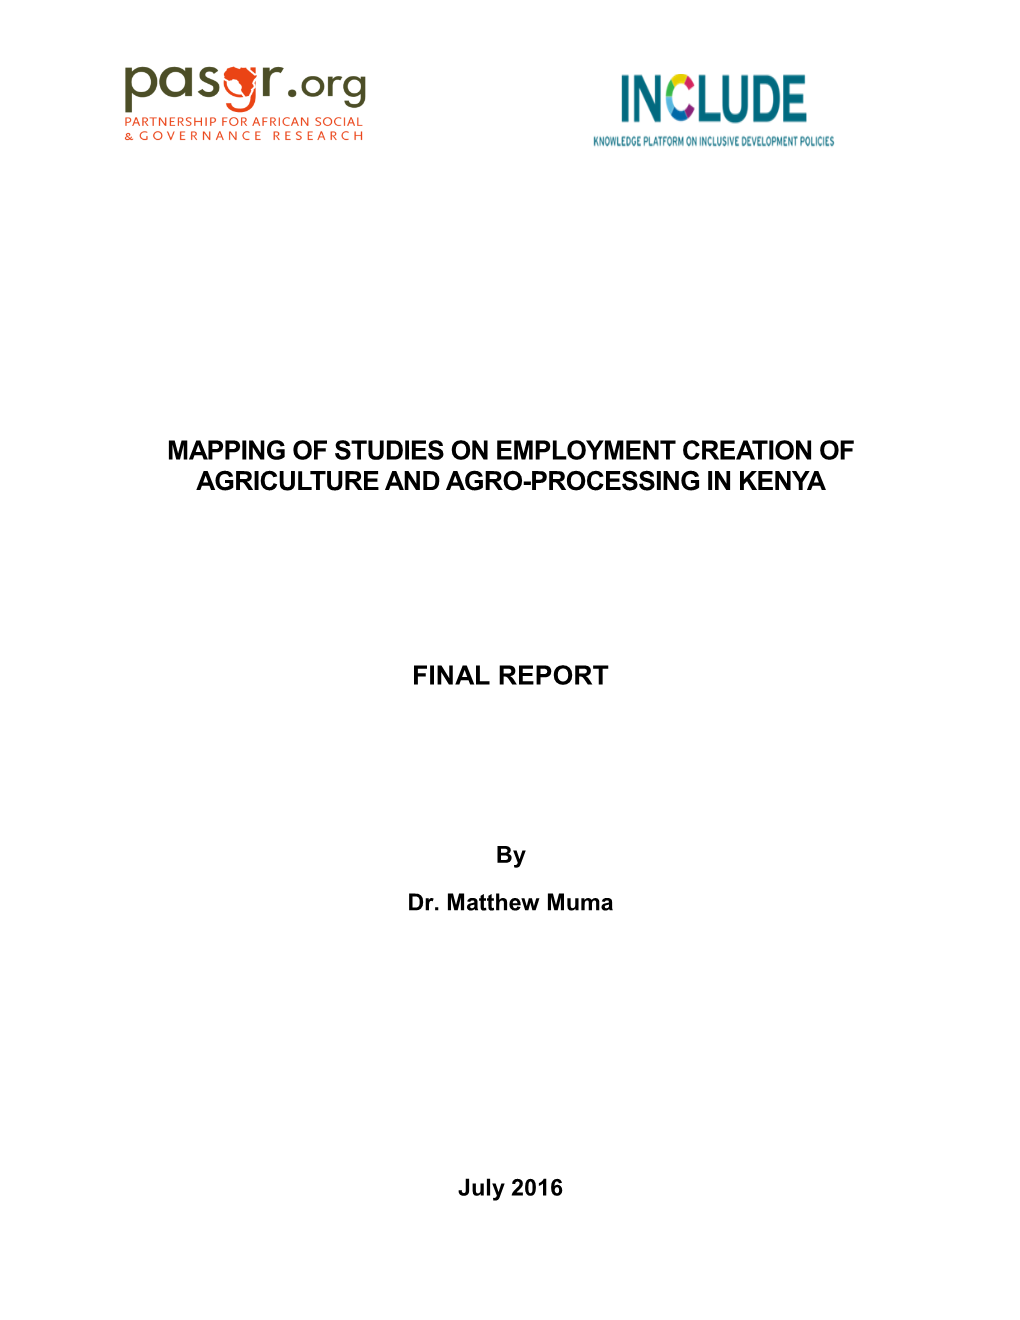 Mapping of Studies on Employment Creation of Agriculture and Agro-Processing in Kenya